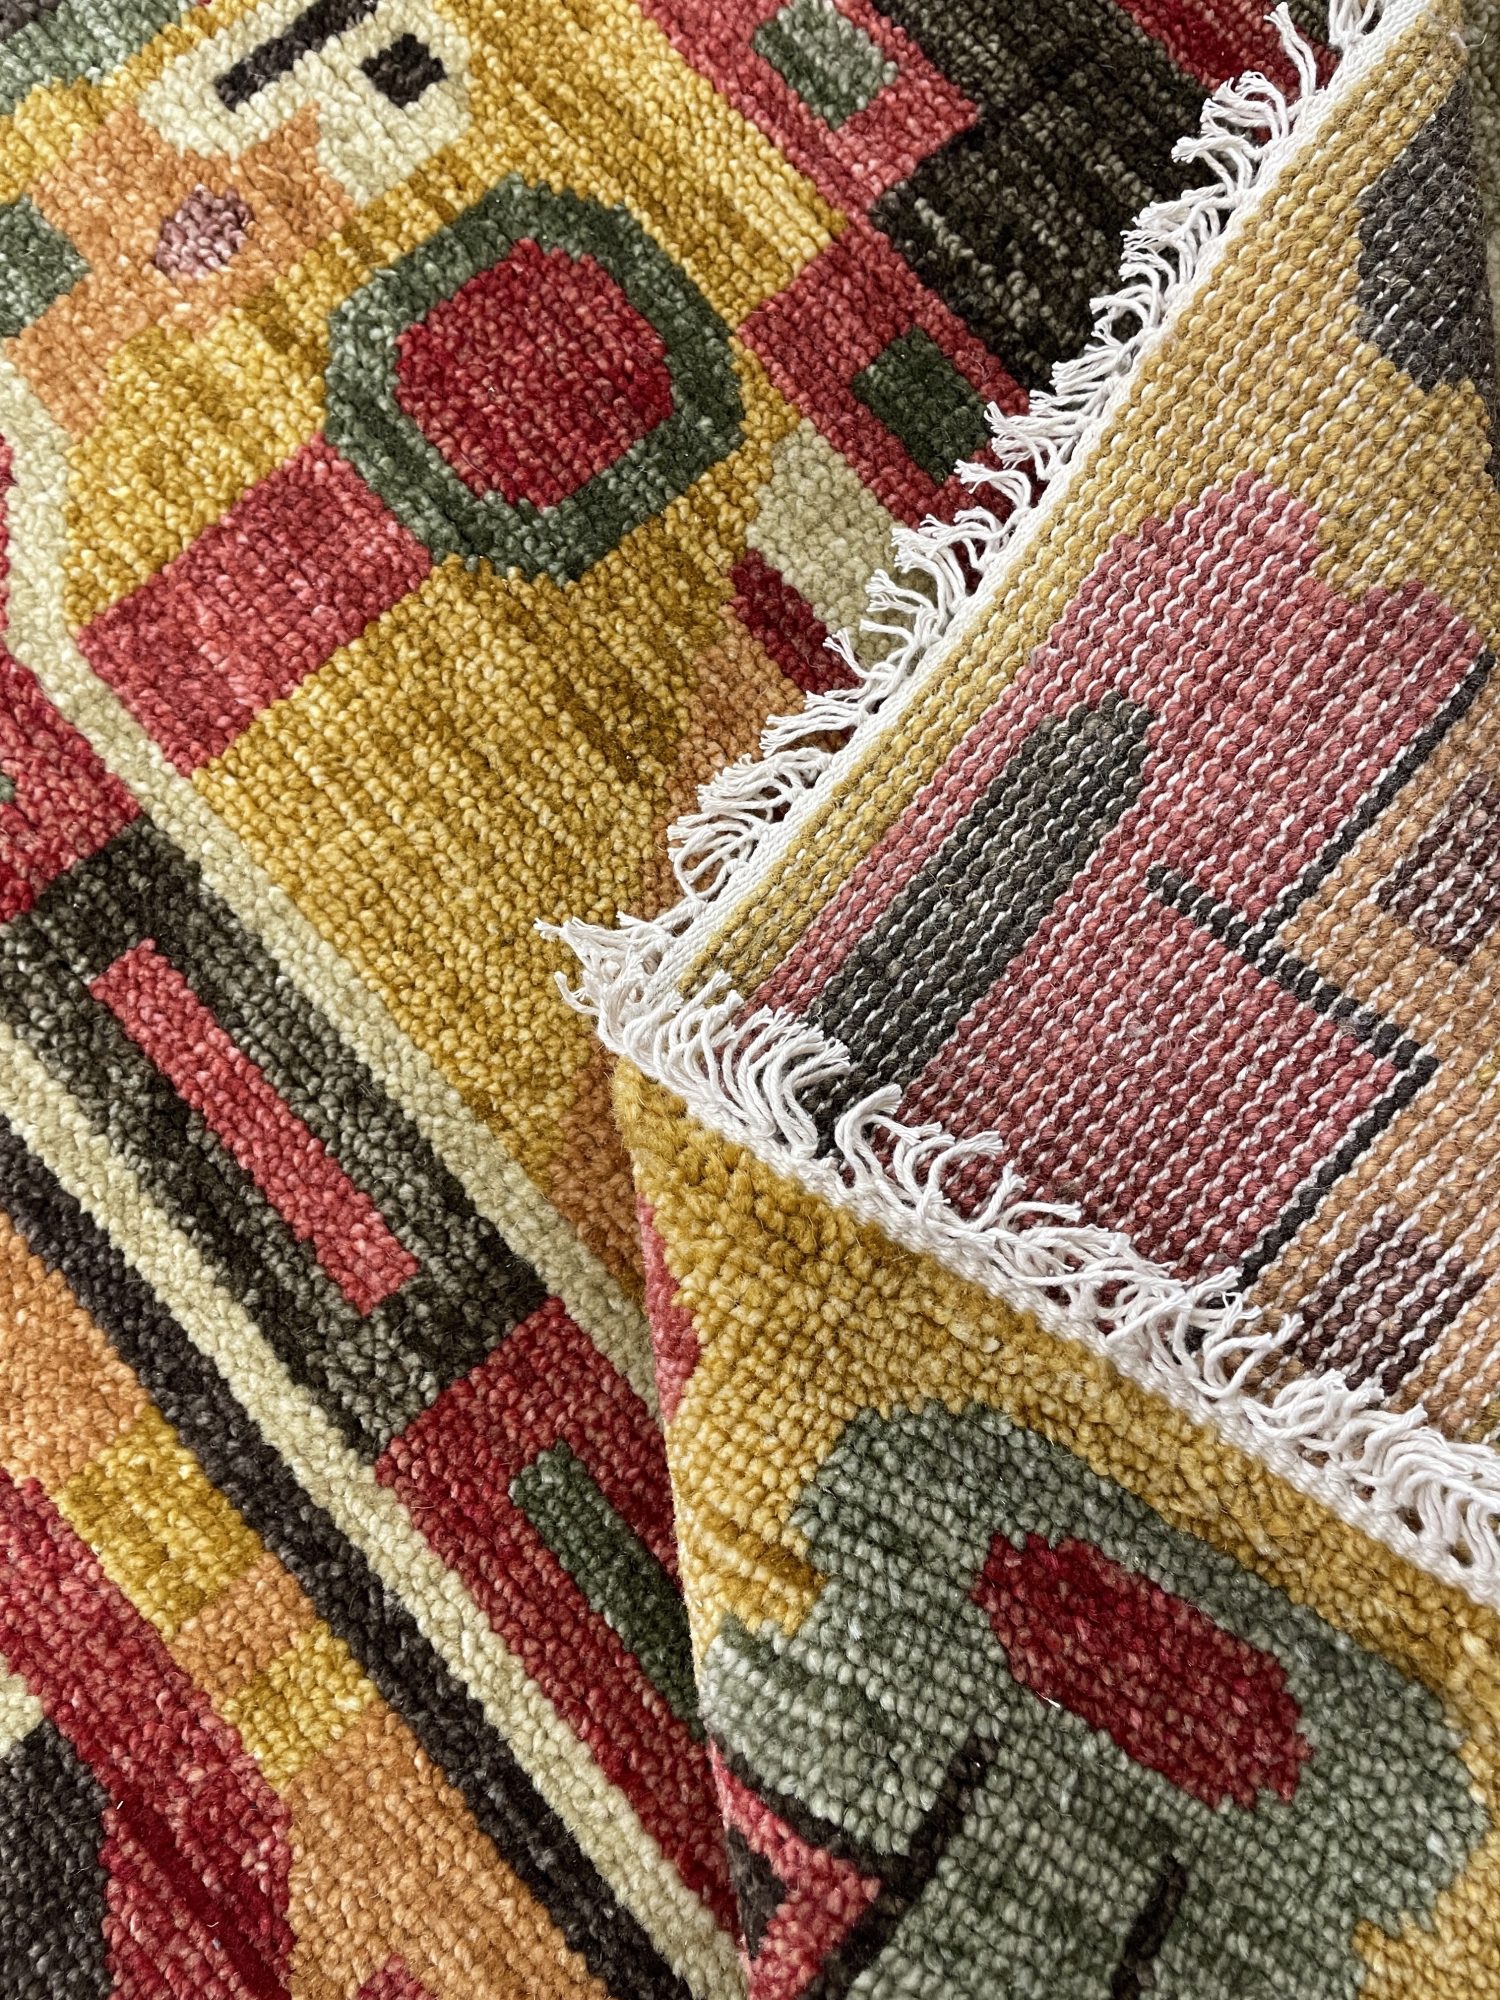 An exquisite collection of modern Peruvian rugs